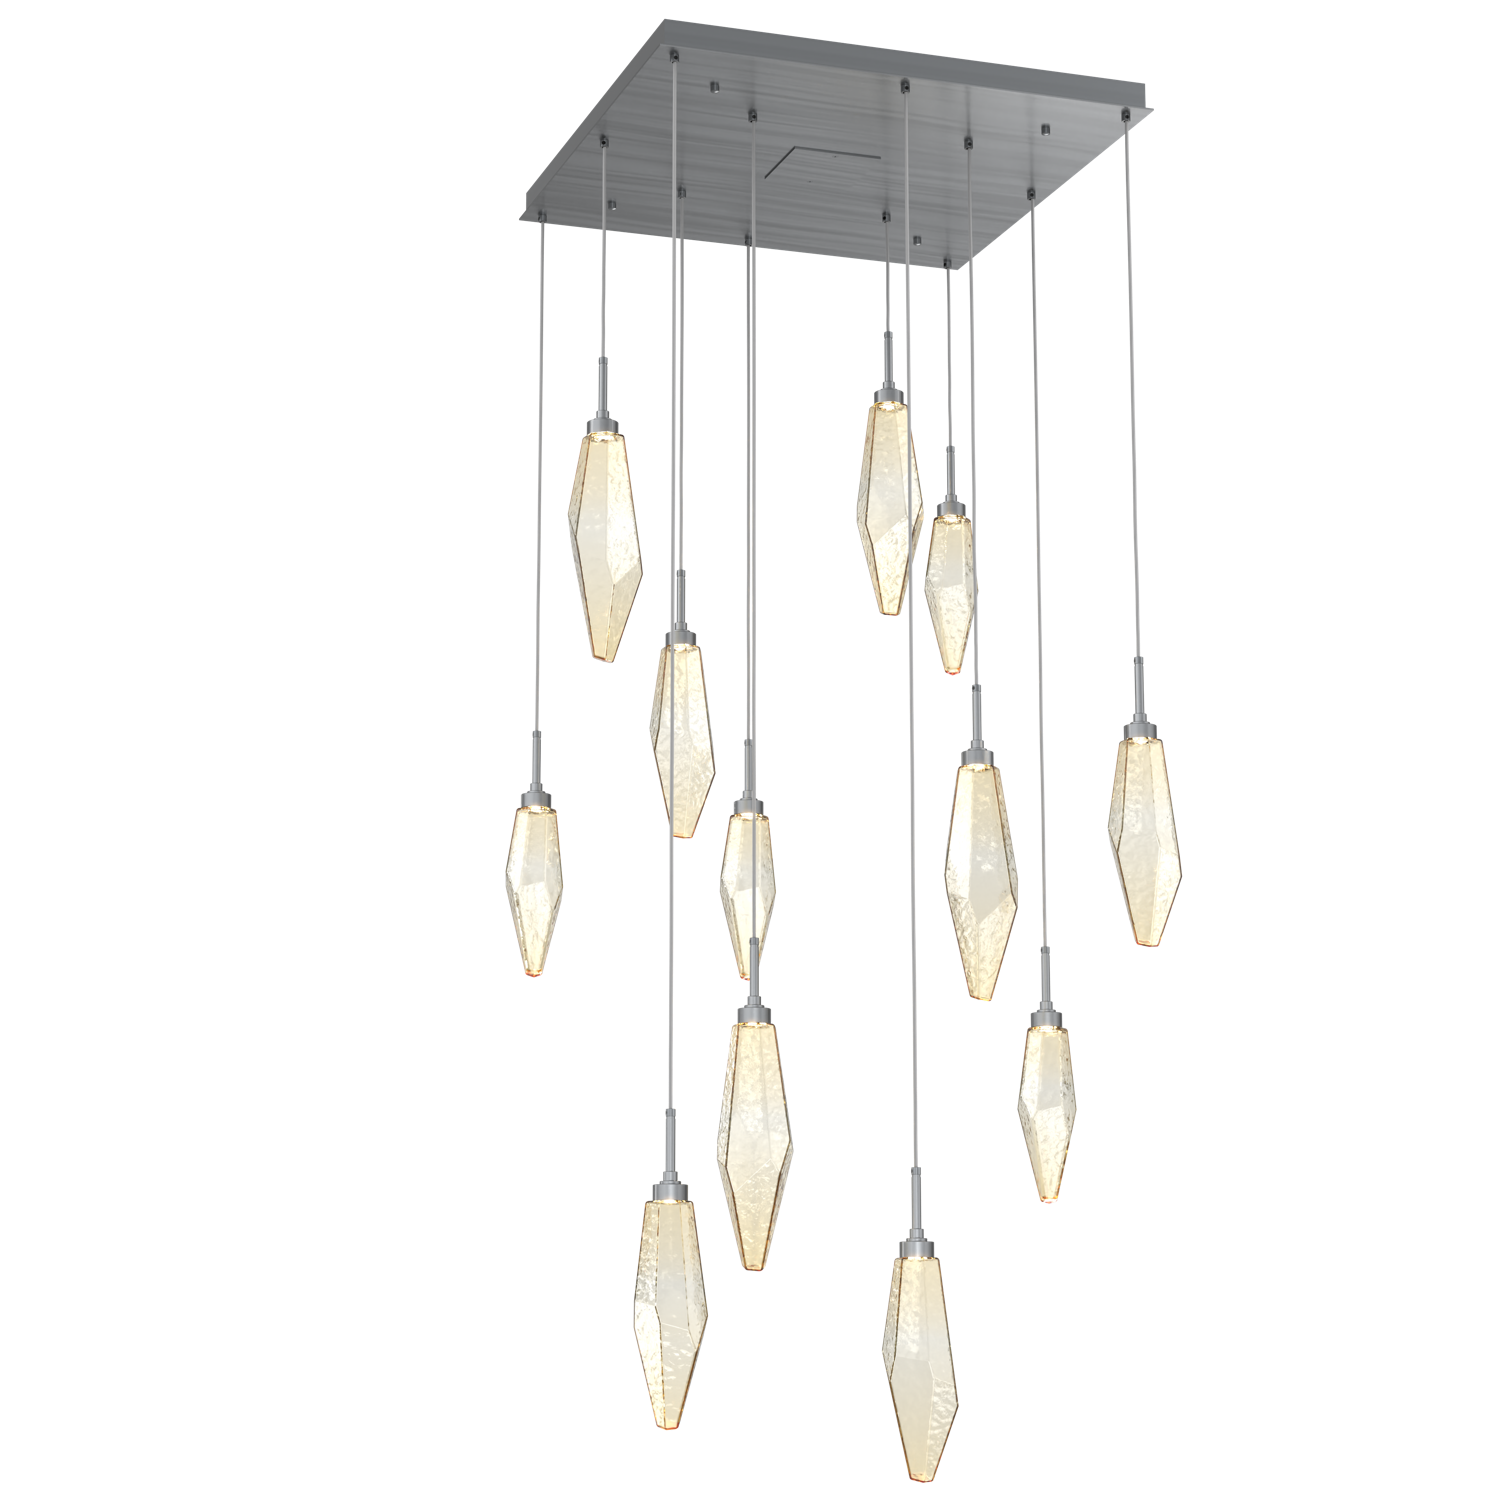 CHB0050-12-GM-CA-Hammerton-Studio-Rock-Crystal-12-light-square-pendant-chandelier-with-gunmetal-finish-and-chilled-amber-blown-glass-shades-and-LED-lamping